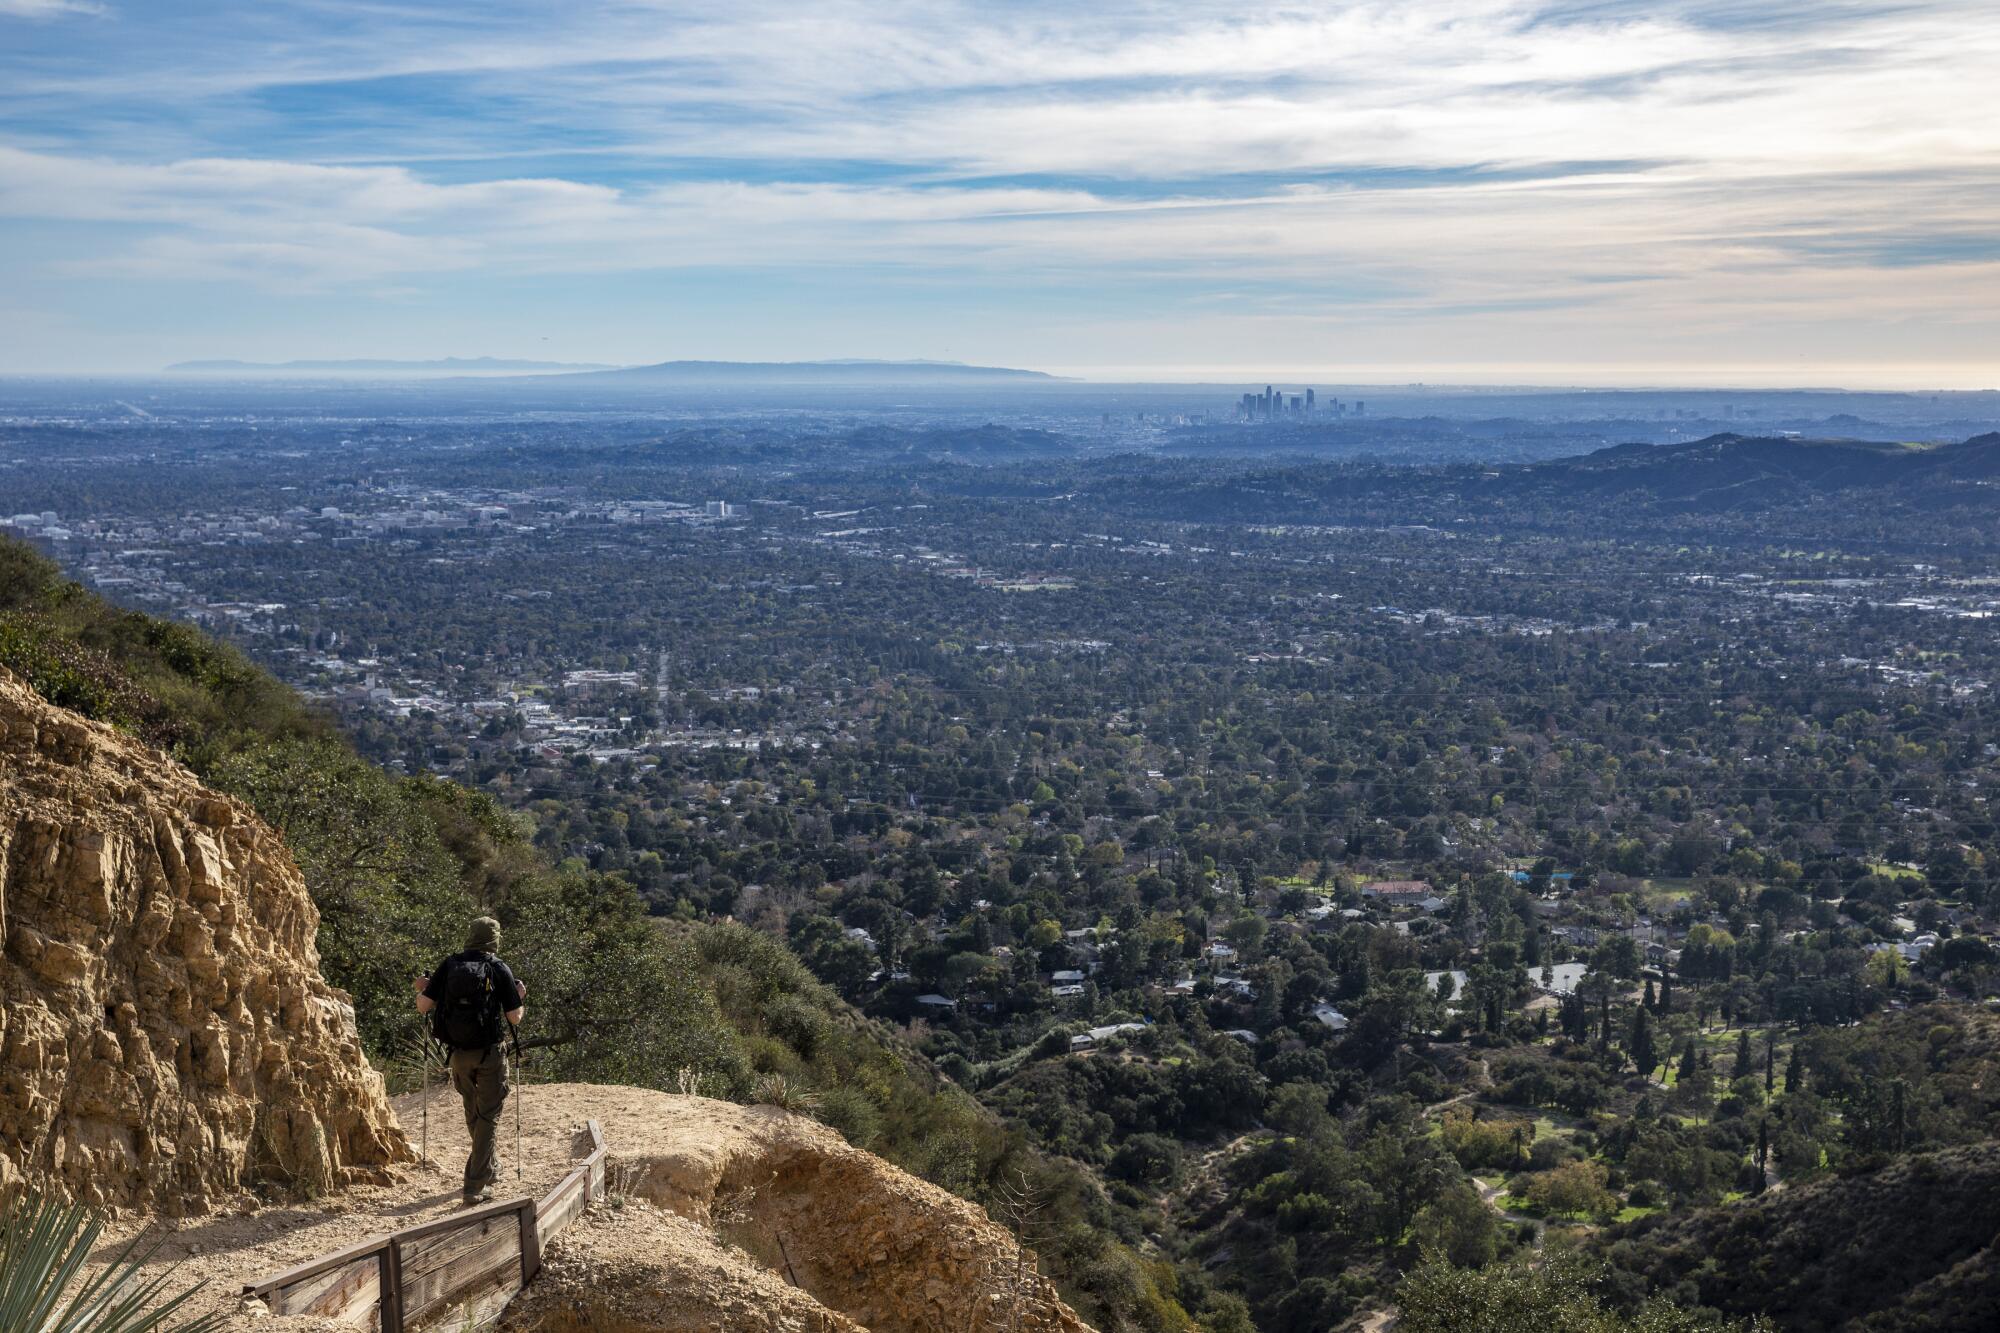 A hiker takes in the views from atop Echo Mountain.